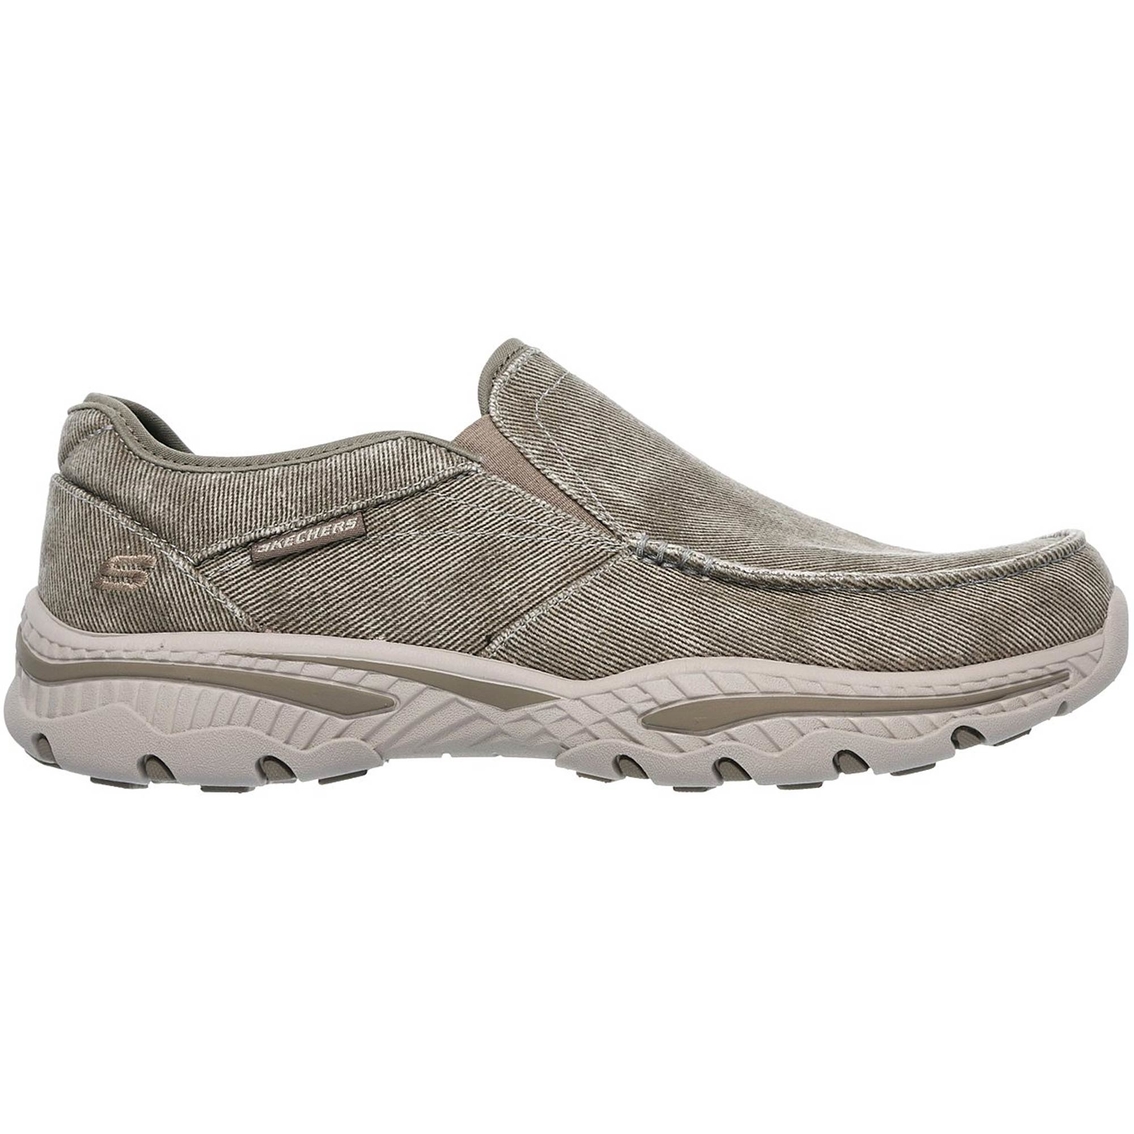 Skechers Men's Relaxed Fit Creston Moseco Shoes | Casuals | Shoes ...